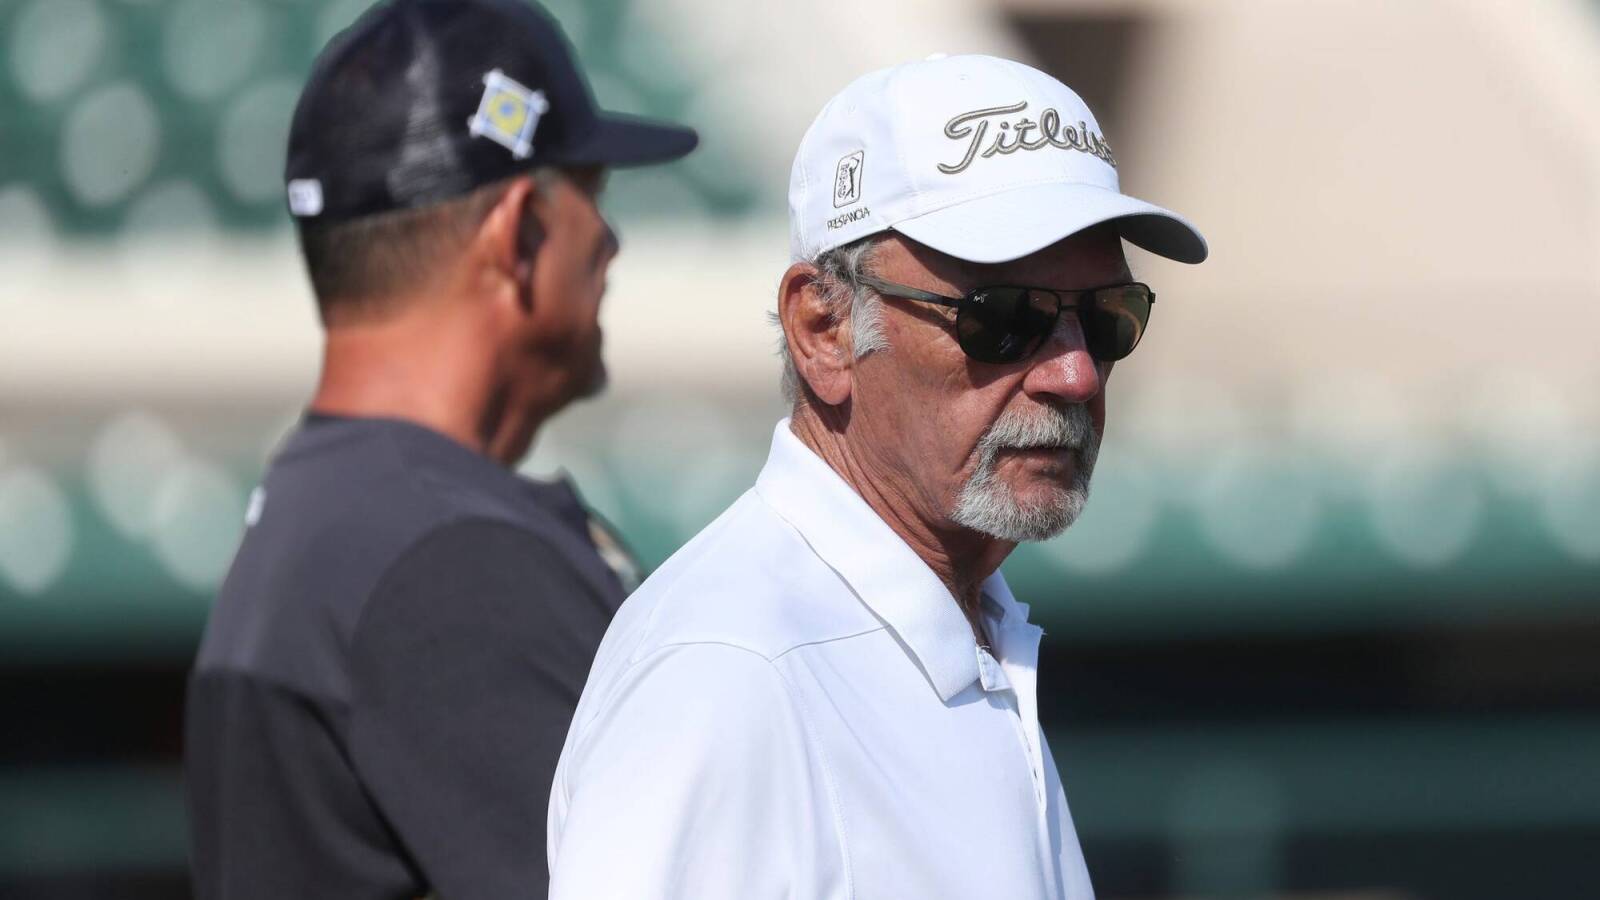 Newly elected HOFer Jim Leyland scared this player 'like a dad'